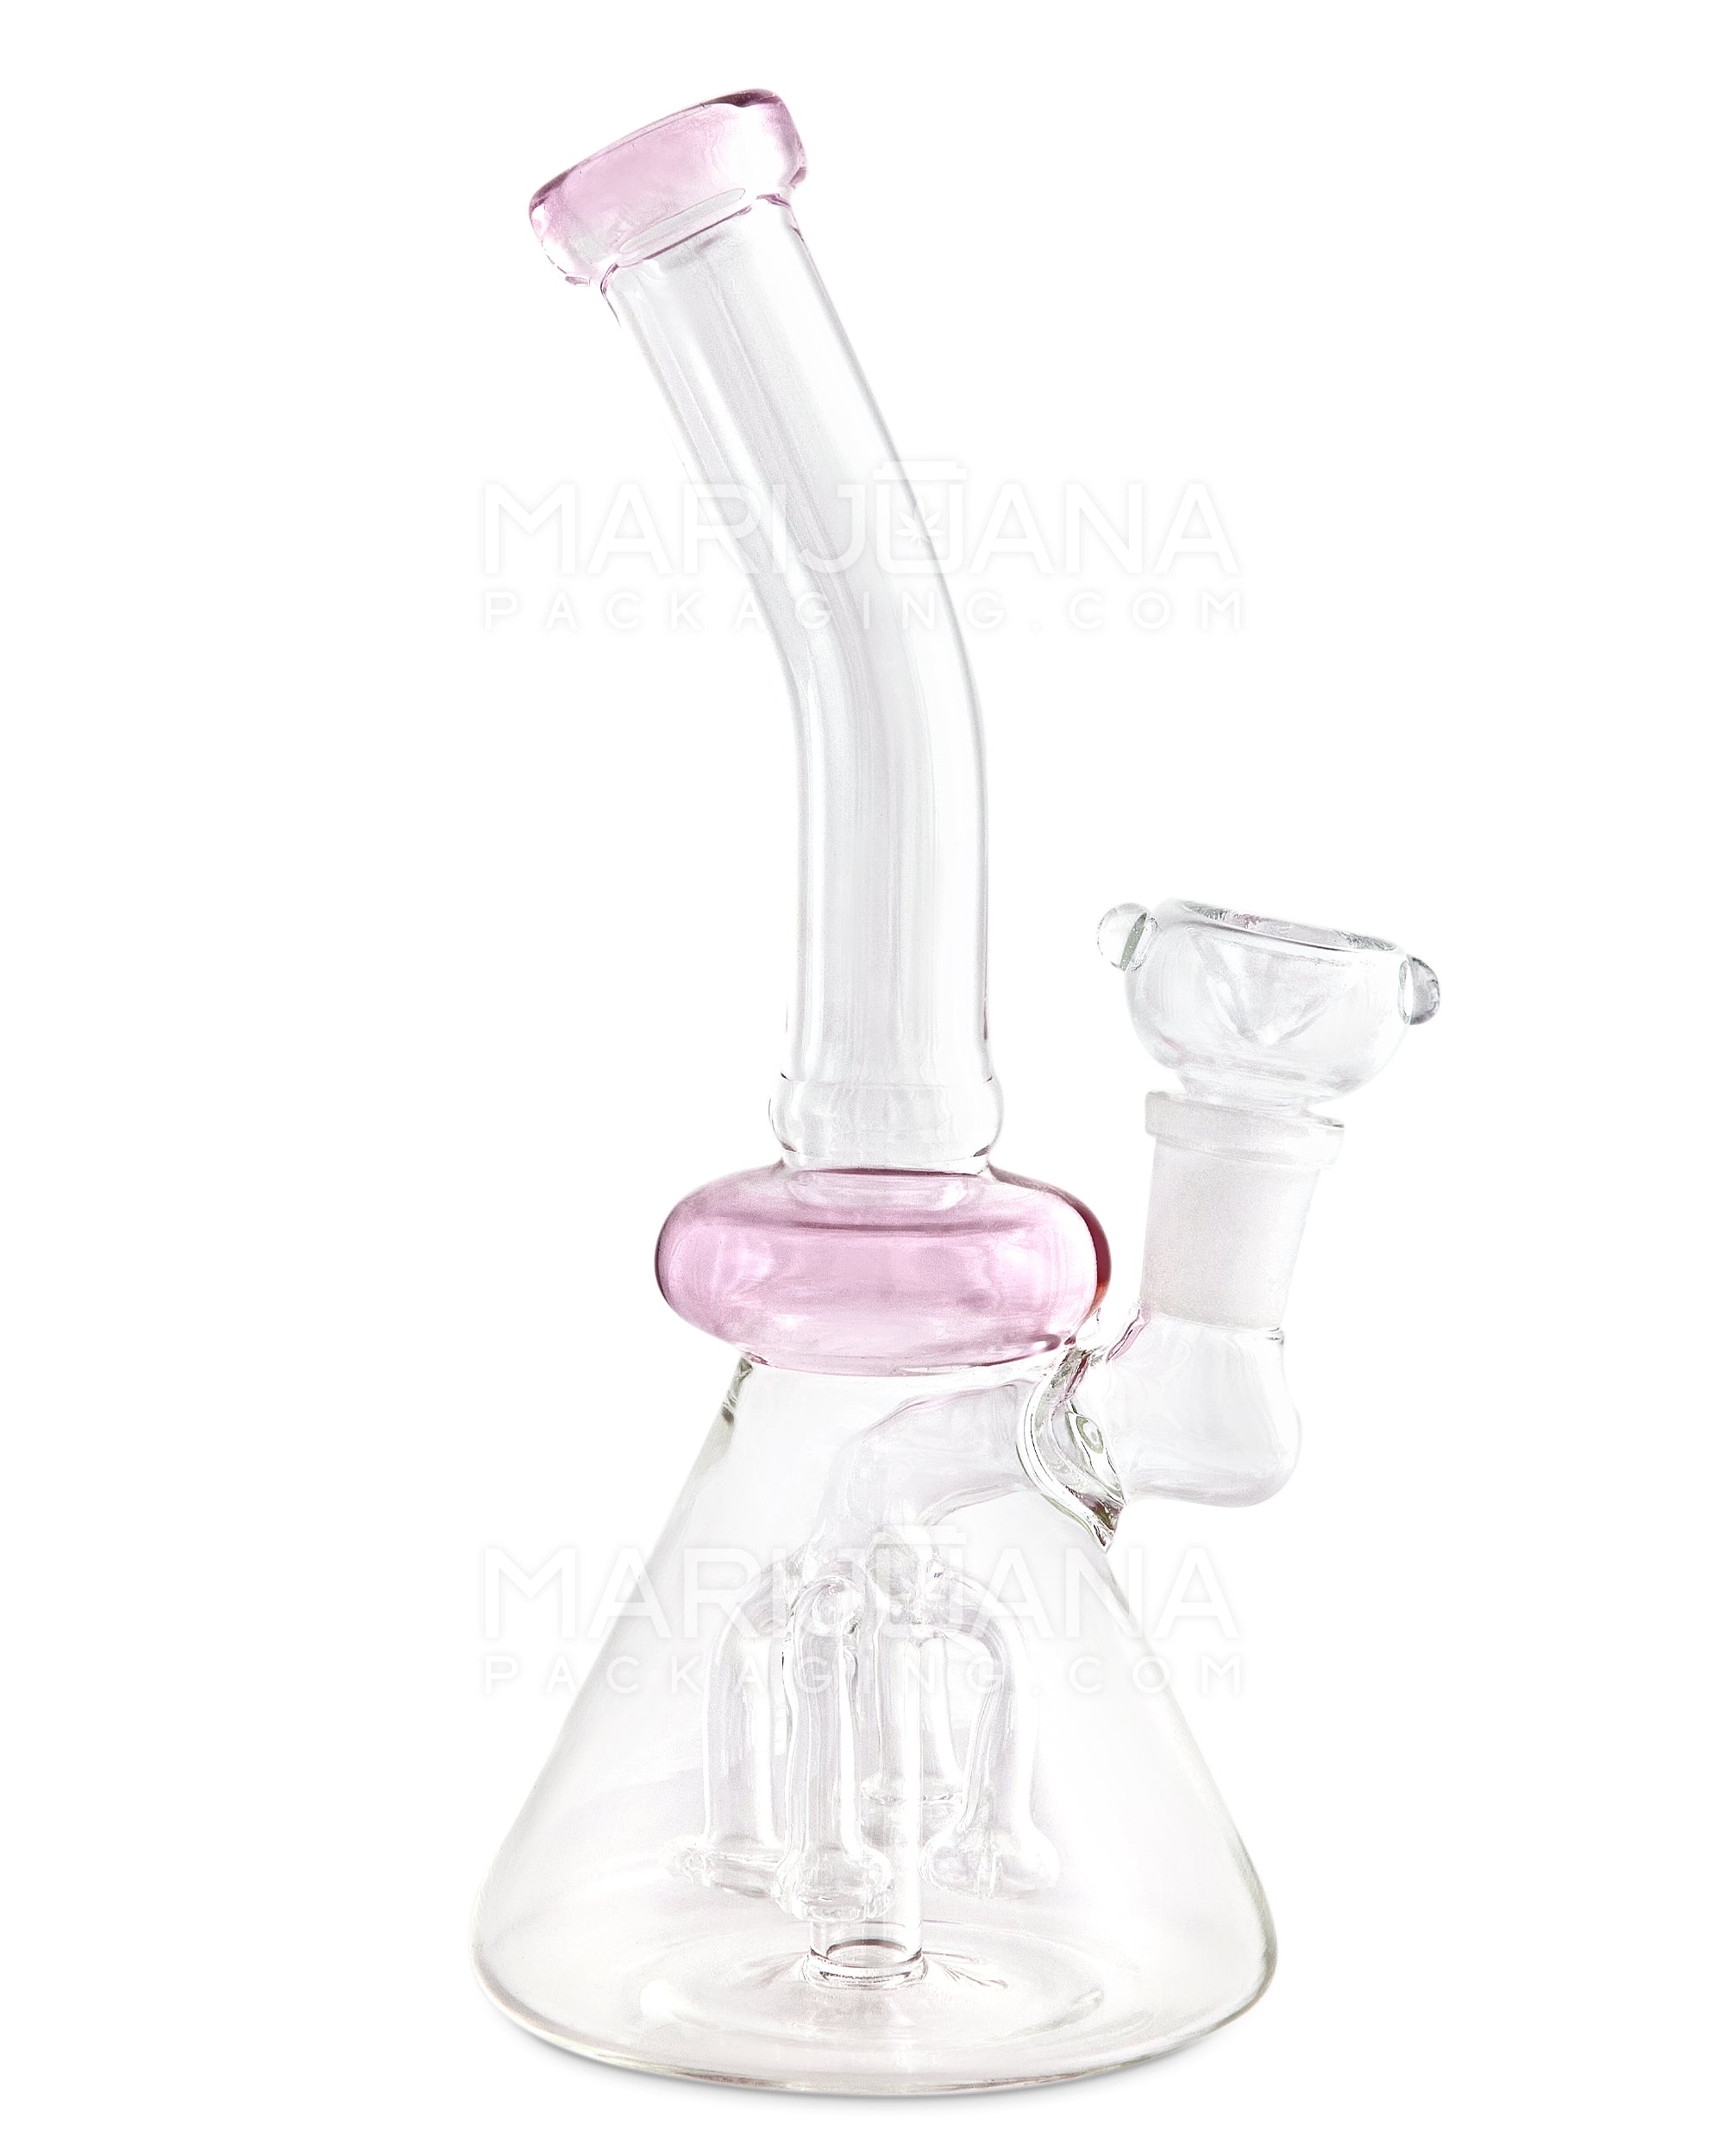 Bent Neck Fruit-Tree Perc Glass Beaker Water Pipe | 8in Tall - 14mm Bowl - Pink - 1